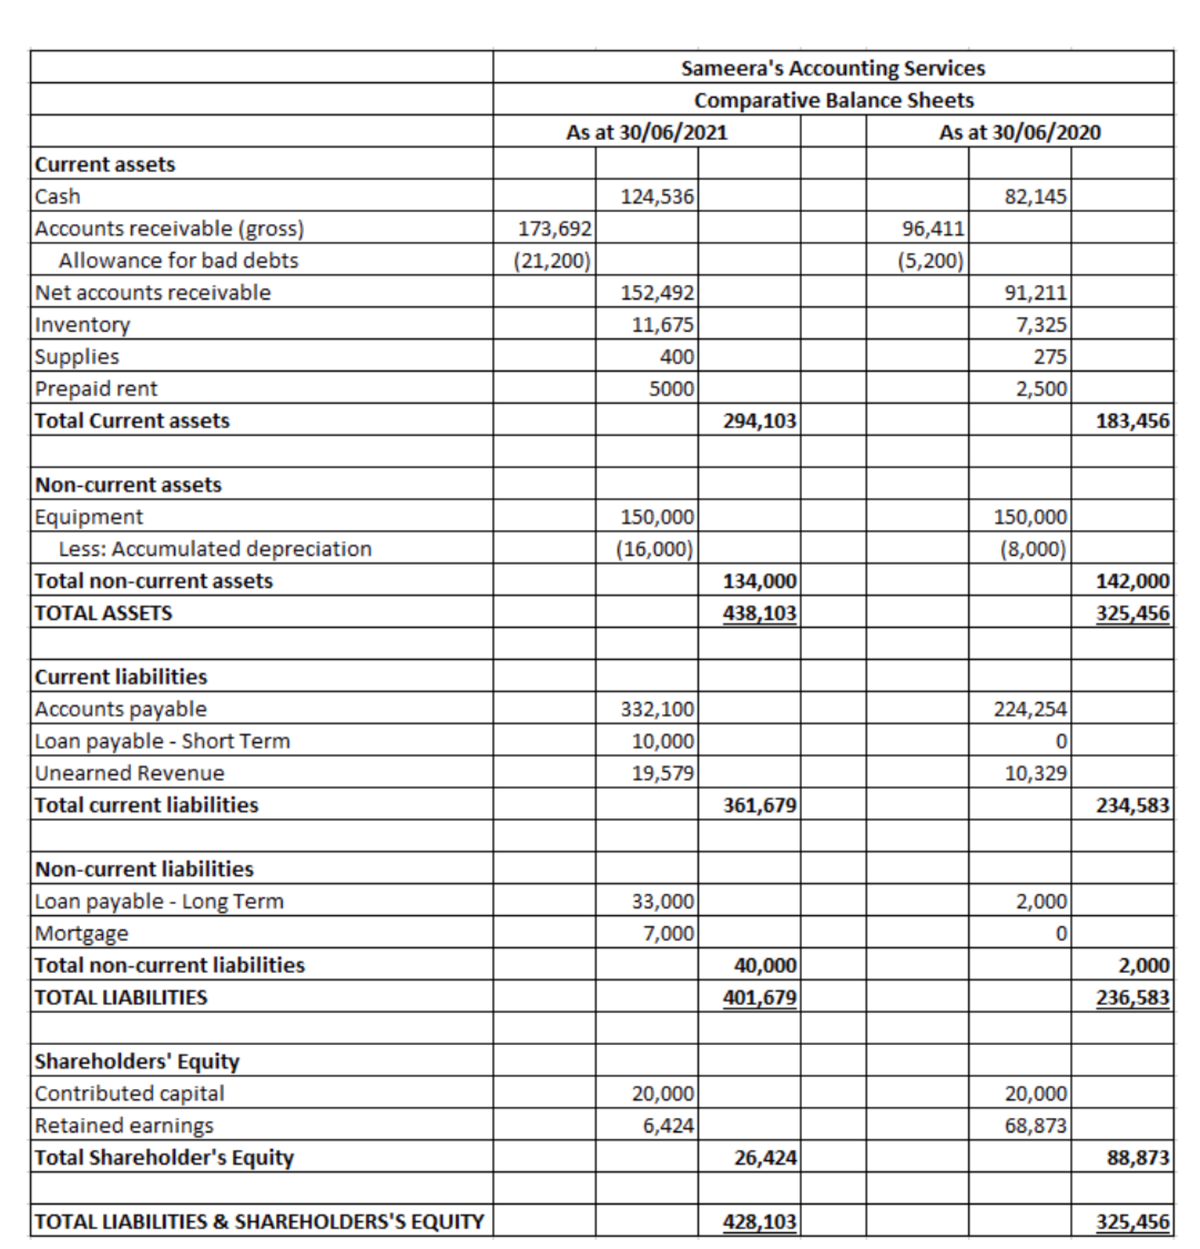 Sameera's Accounting Services
Comparative Balance Sheets
As at 30/06/2021
As at 30/06/2020
Current assets
Cash
Accounts receivable (gross)
124,536
82,145
96,411
(5,200)
173,692
Allowance for bad debts
(21,200)
Net accounts receivable
Inventory
Supplies
Prepaid rent
Total Current assets
152,492
91,211
11,675
7,325
400
275
5000
2,500
294,103
183,456
Non-current assets
Equipment
Less: Accumulated depreciation
150,000
150,000
(8,000)
(16,000)
Total non-current assets
TOTAL ASSETS
142,000
325,456
134,000
438,103
|Current liabilities
Accounts payable
Loan payable - Short Term
Unearned Revenue
332,100
224,254
10,000
19,579
10,329
Total current liabilities
361,679
234,583
Non-current liabilities
Loan payable - Long Term
Mortgage
Total non-current liabilities
33,000
2,000
7,000
40,000
2,000
236,583
TOTAL LIABILITIES
401,679
Shareholders' Equity
Contributed capital
Retained earnings
Total Shareholder's Equity
20,000
68,873
20,000
6,424
26,424
88,873
TOTAL LIABILITIES & SHAREHOLDERS'S EQUITY
428,103
325,456
